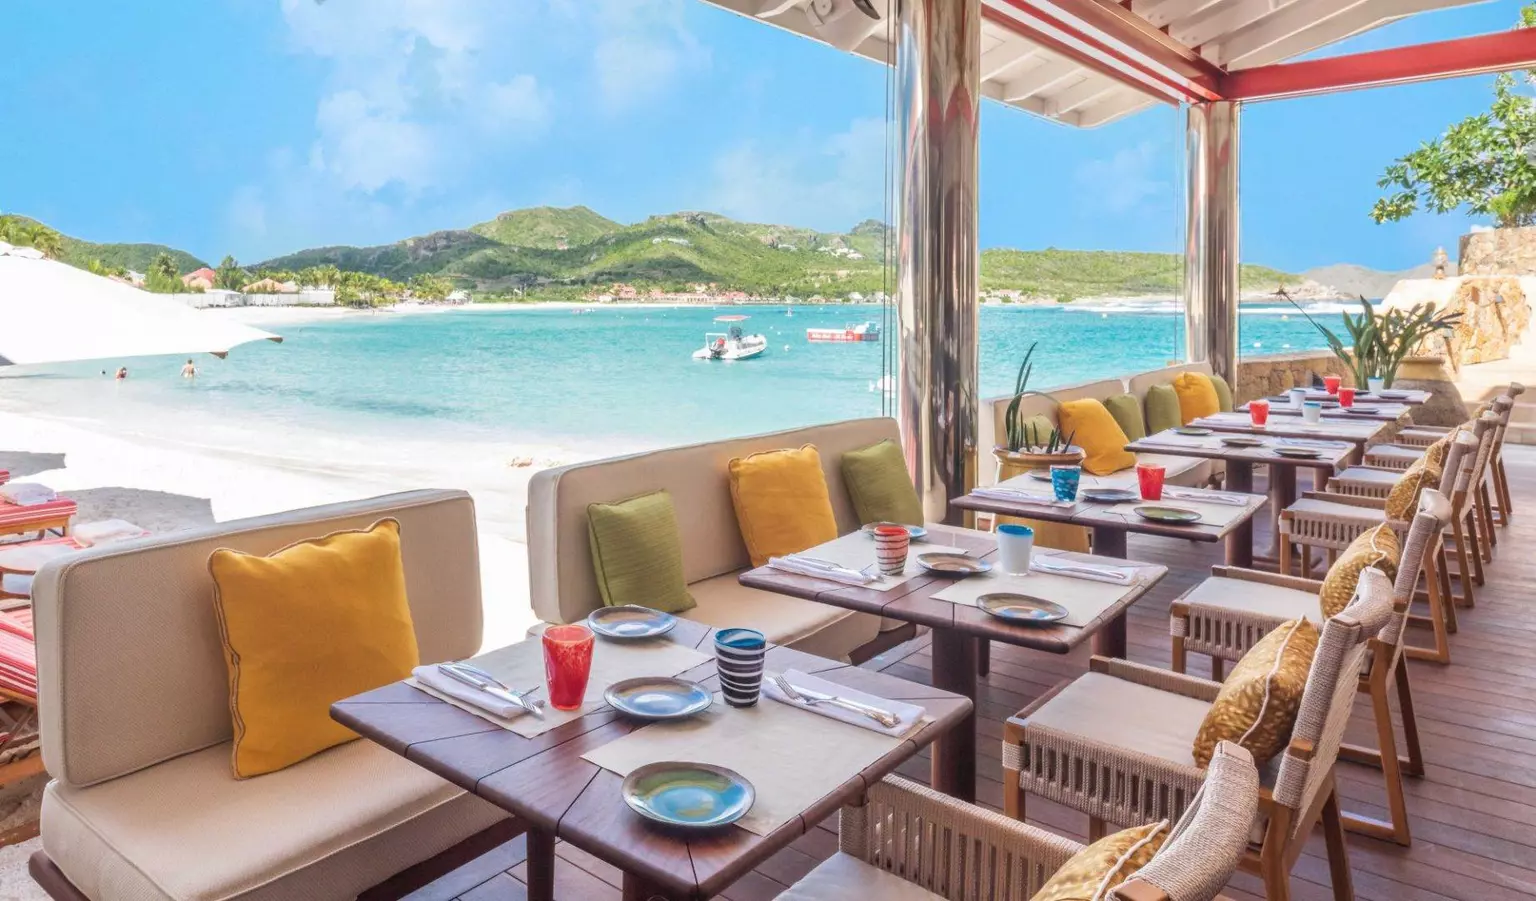 A DJ's Secret Guide to St. Barth: The Luxury Hotels, Crazy Dance Spots and  Hidden Beaches of the Party Island